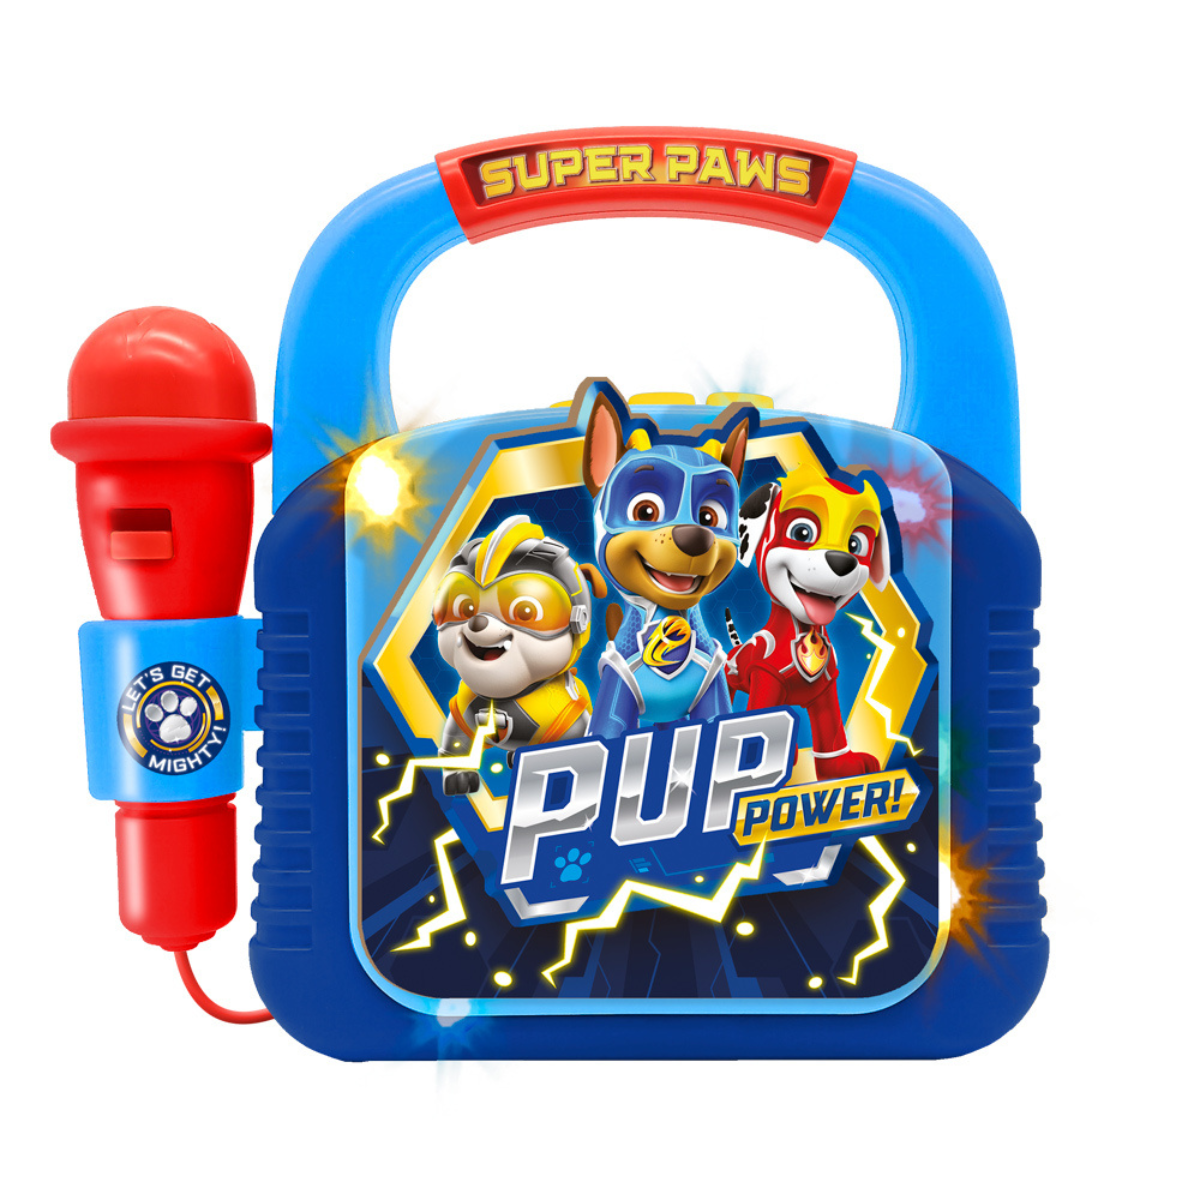 Reproductor MP3 Paw Patrol